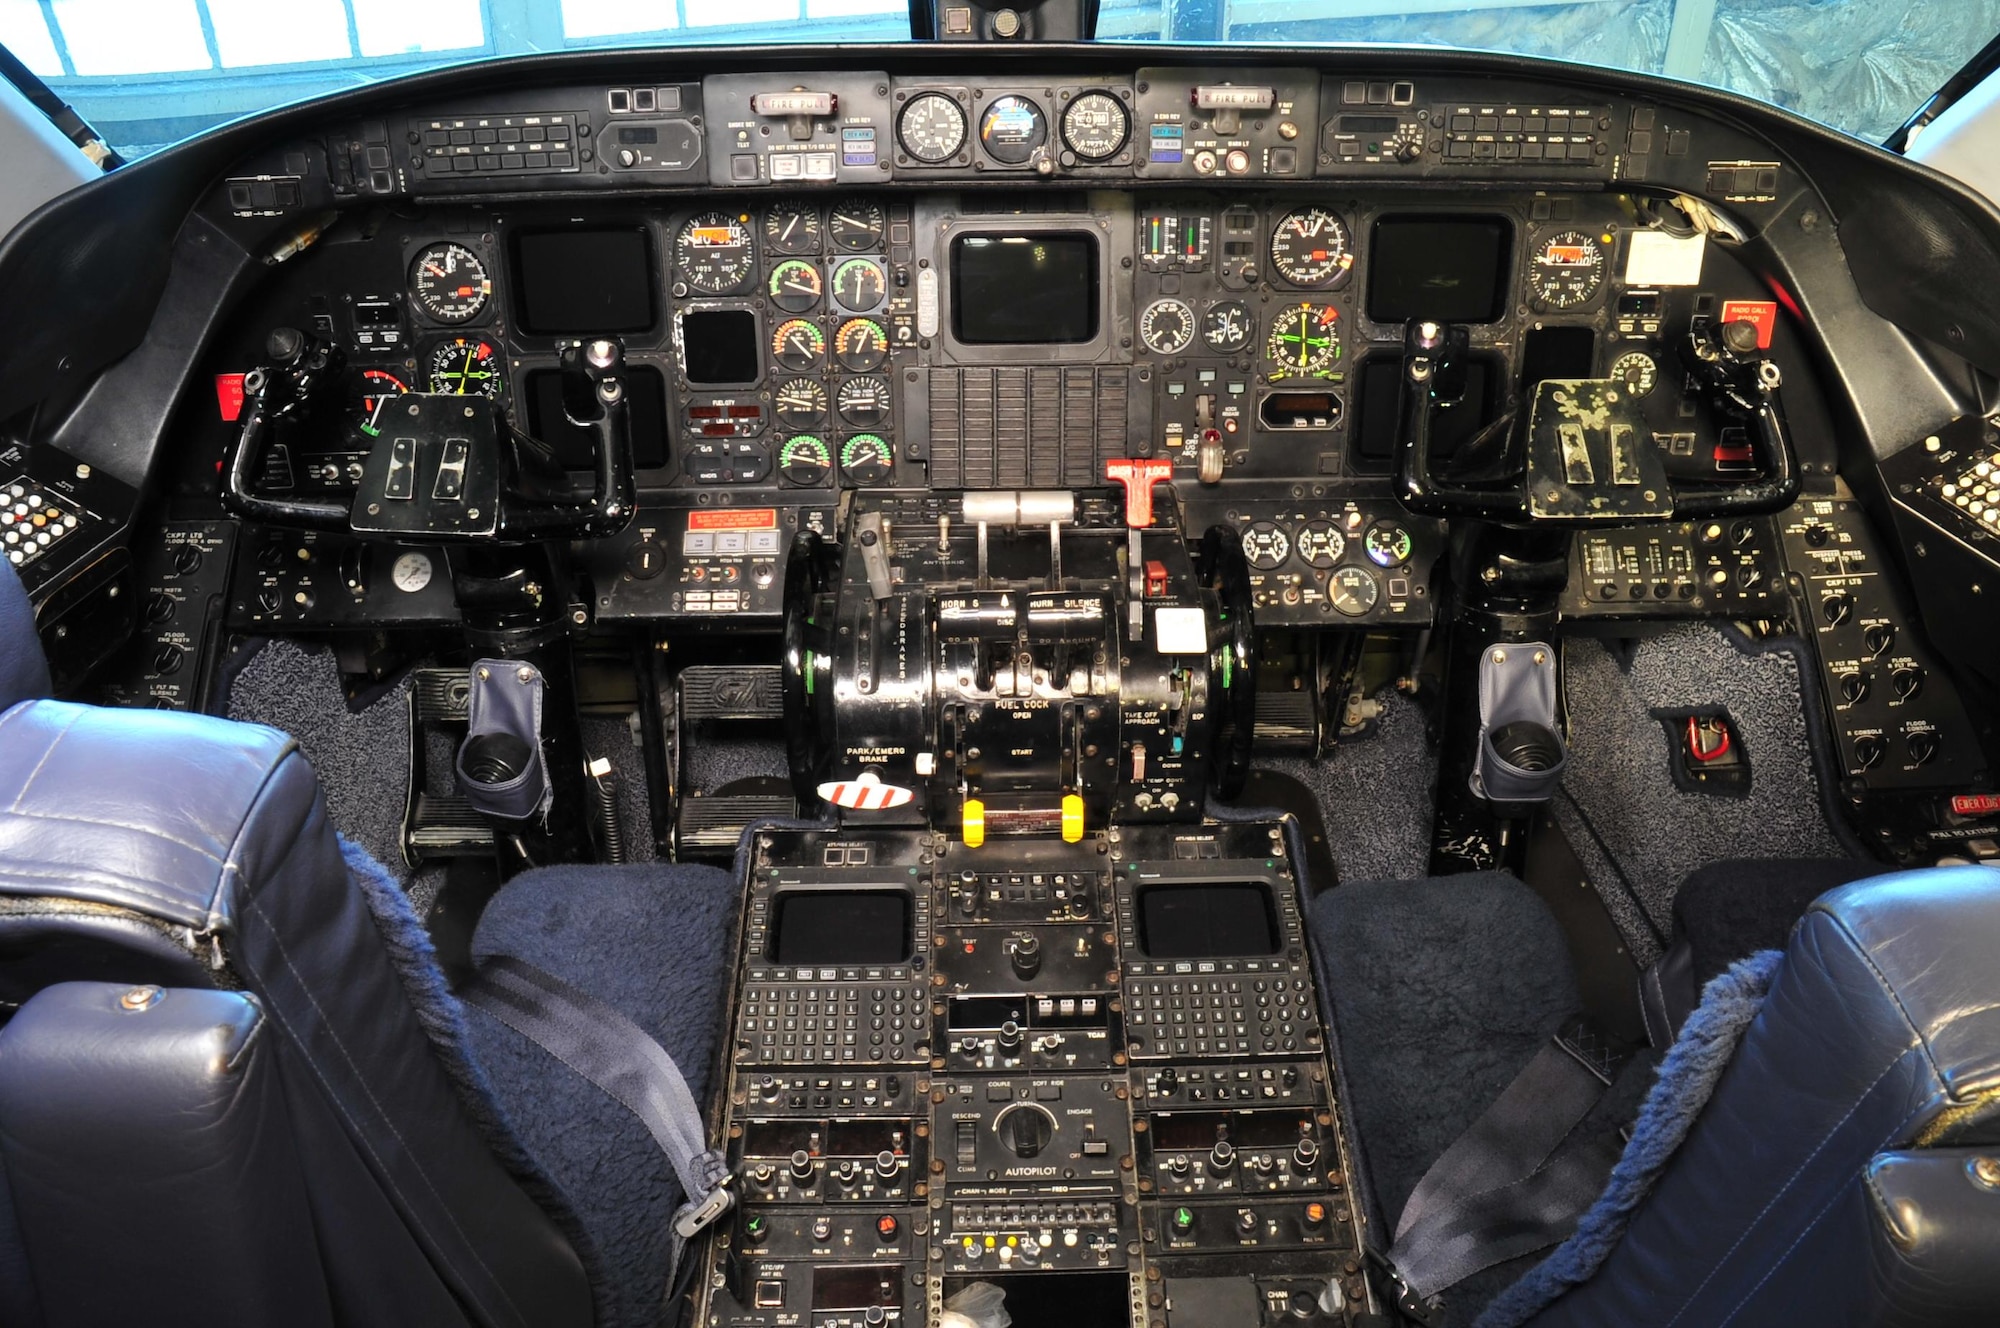 DAYTON, Ohio -- Gulfstream Aerospace C-20B cockpit in the Presidential Gallery at the National Museum of the United States Air Force. (U.S. Air Force photo by Ken LaRock)